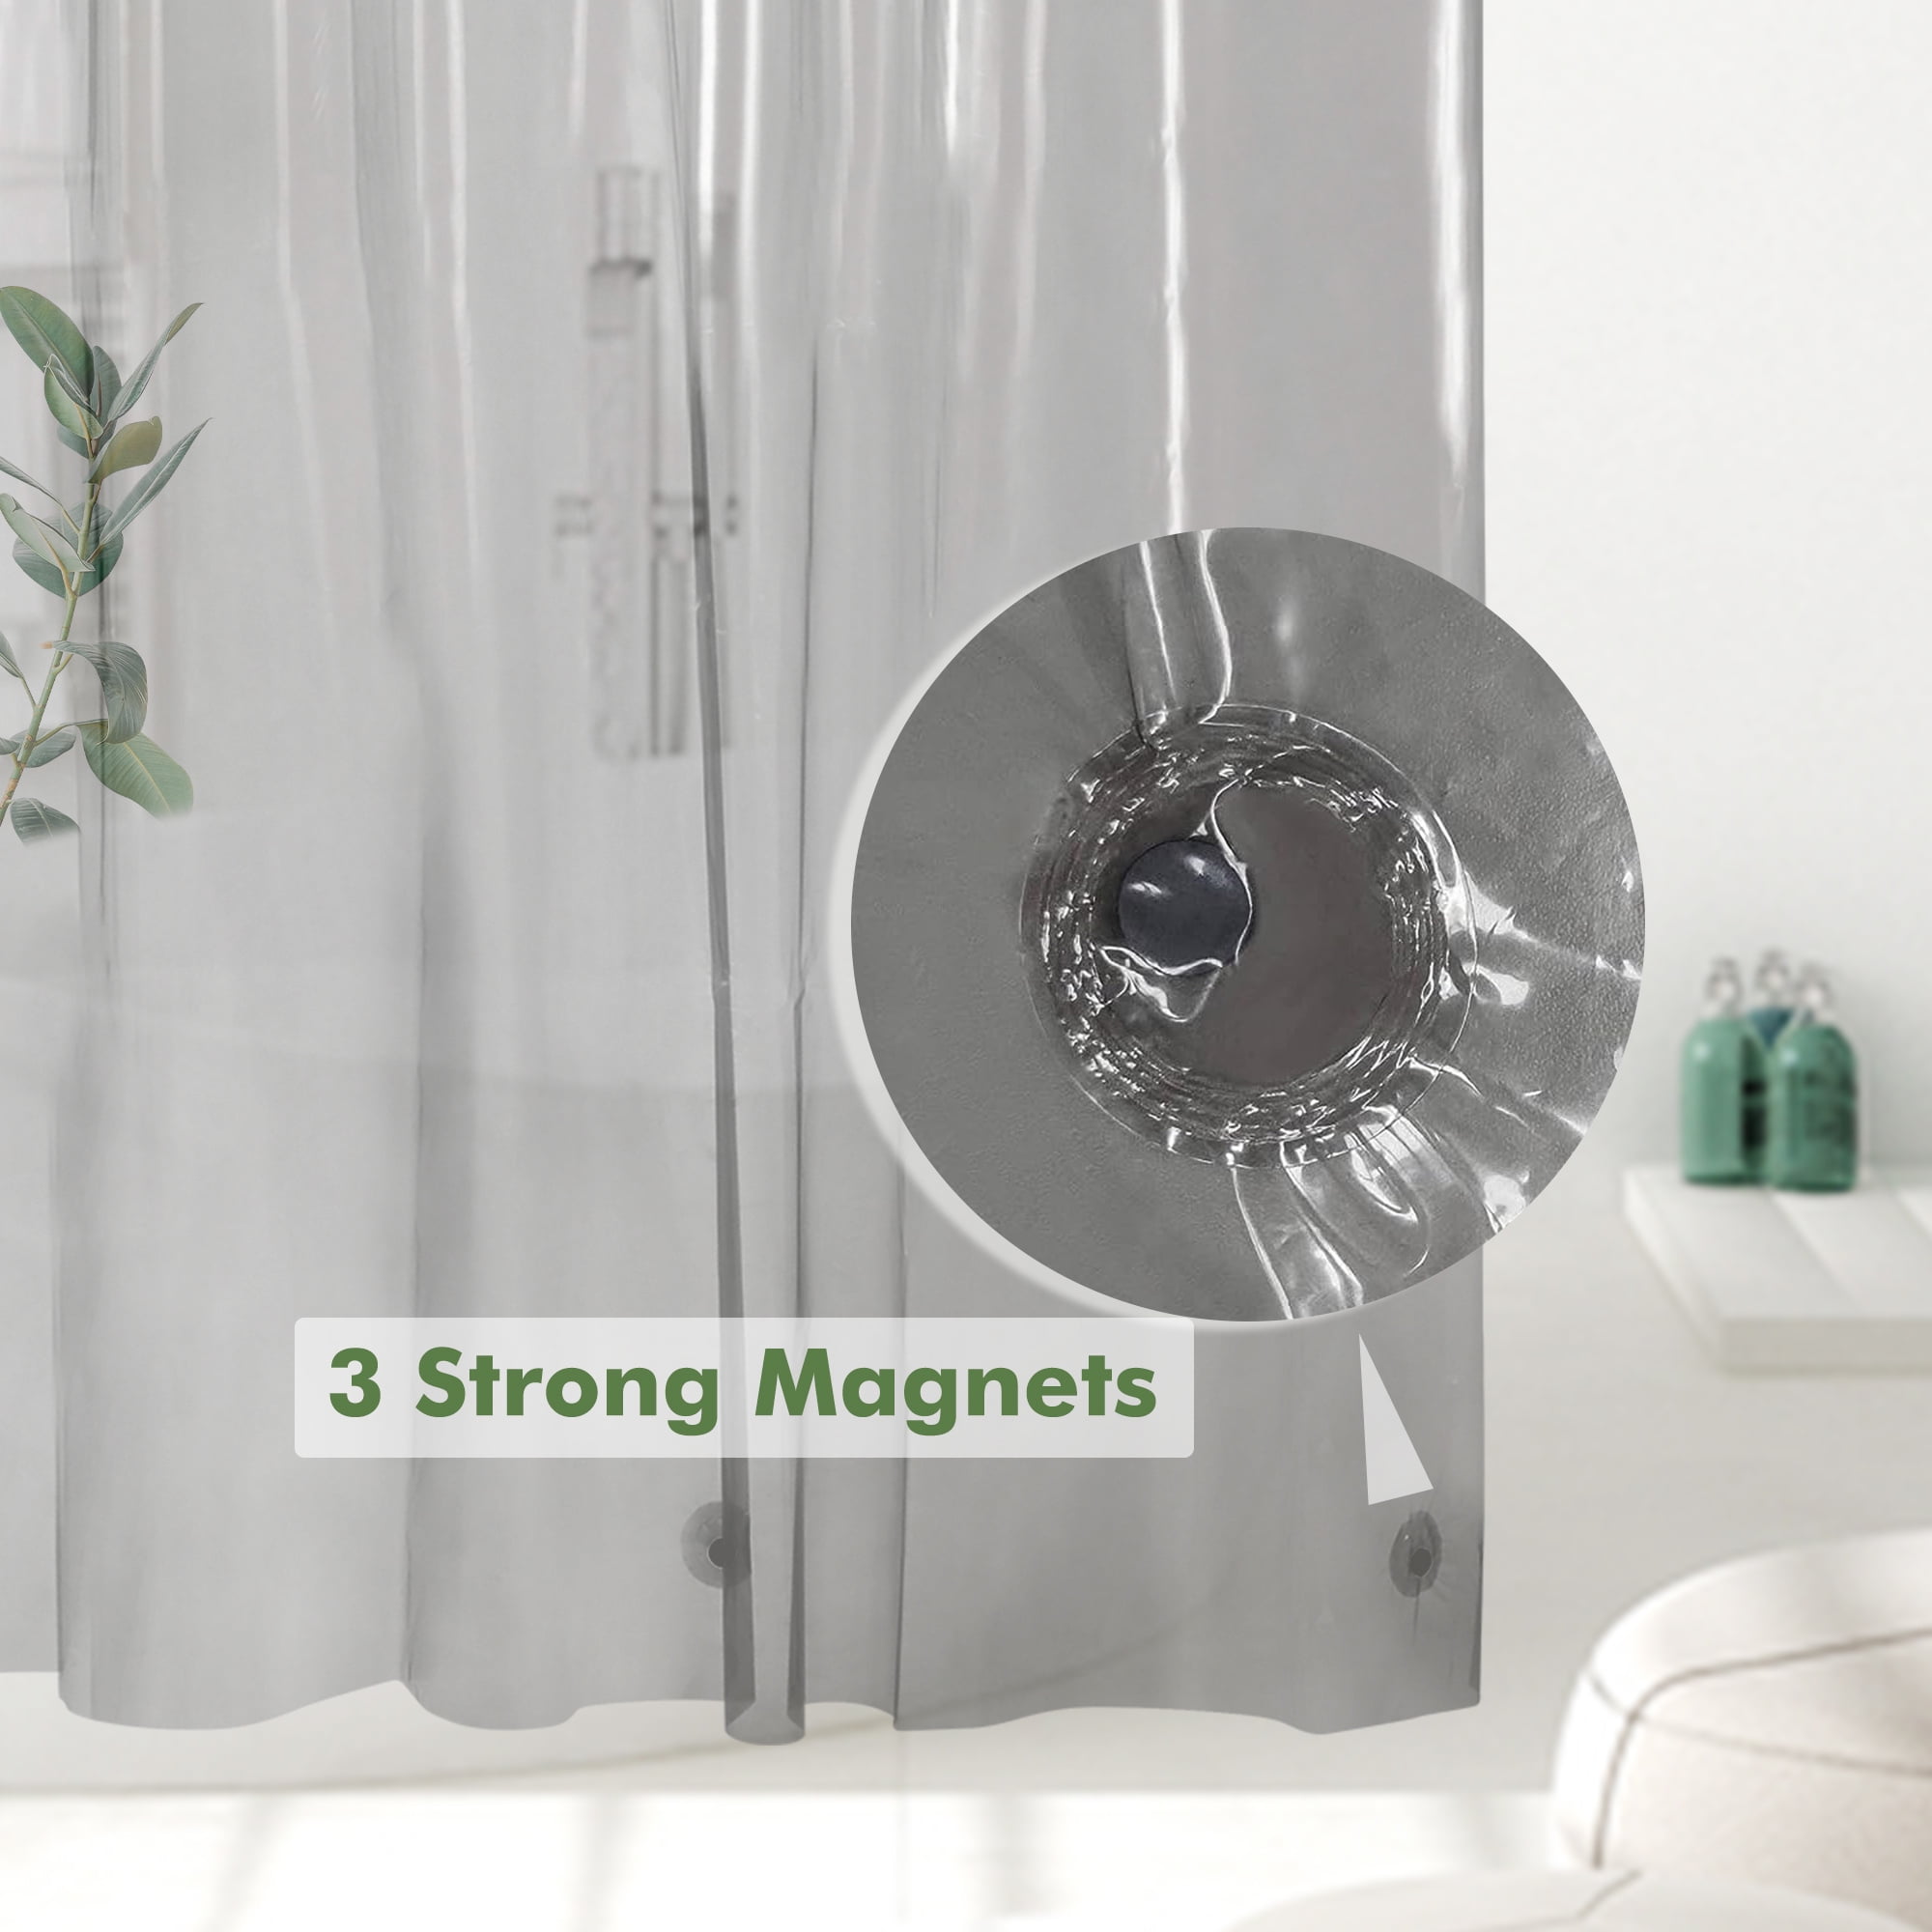 Use Extra Shower Curtain Rods to Increase Bathroom Storage & More «  MacGyverisms :: WonderHowTo